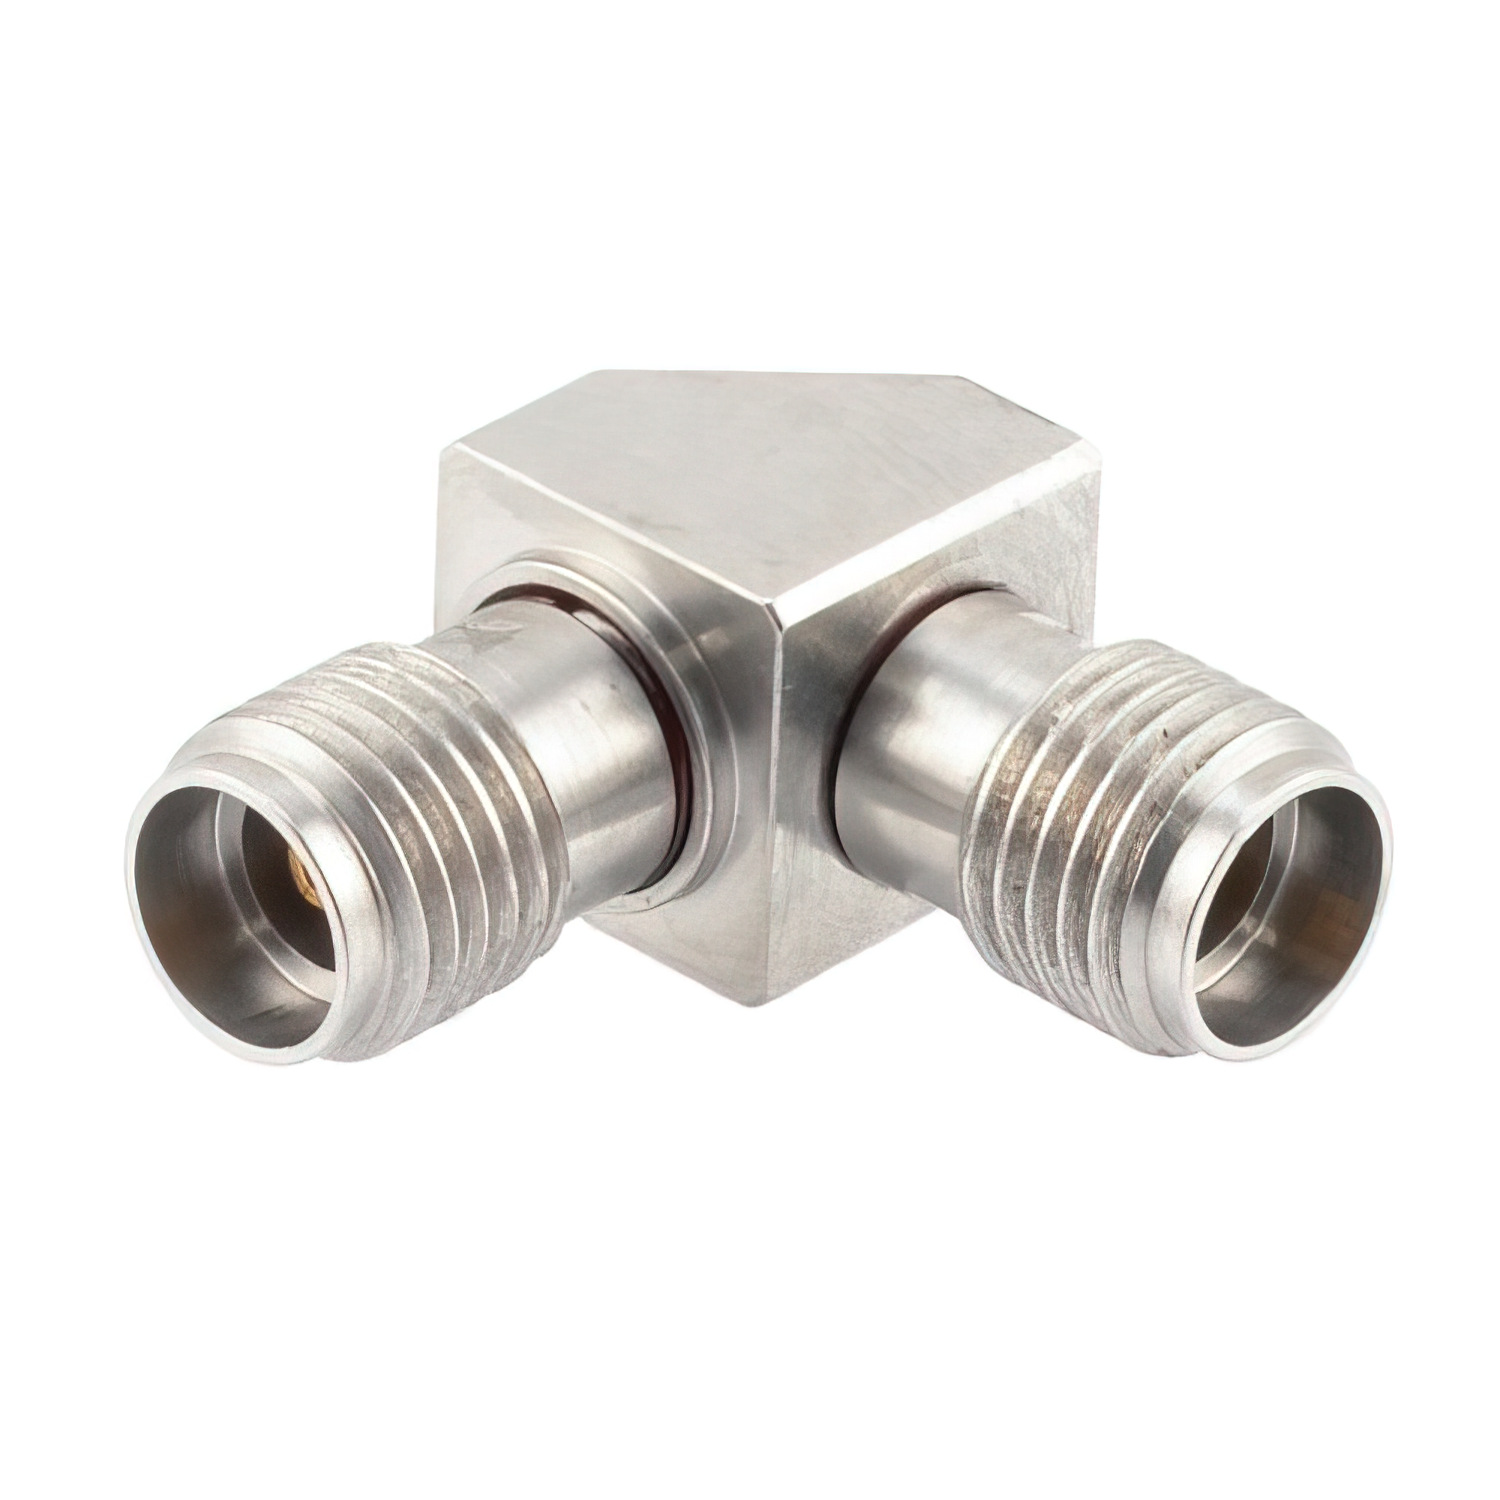 3.5mm Female to 3.5mm Female Miter Right Angle Adapter1